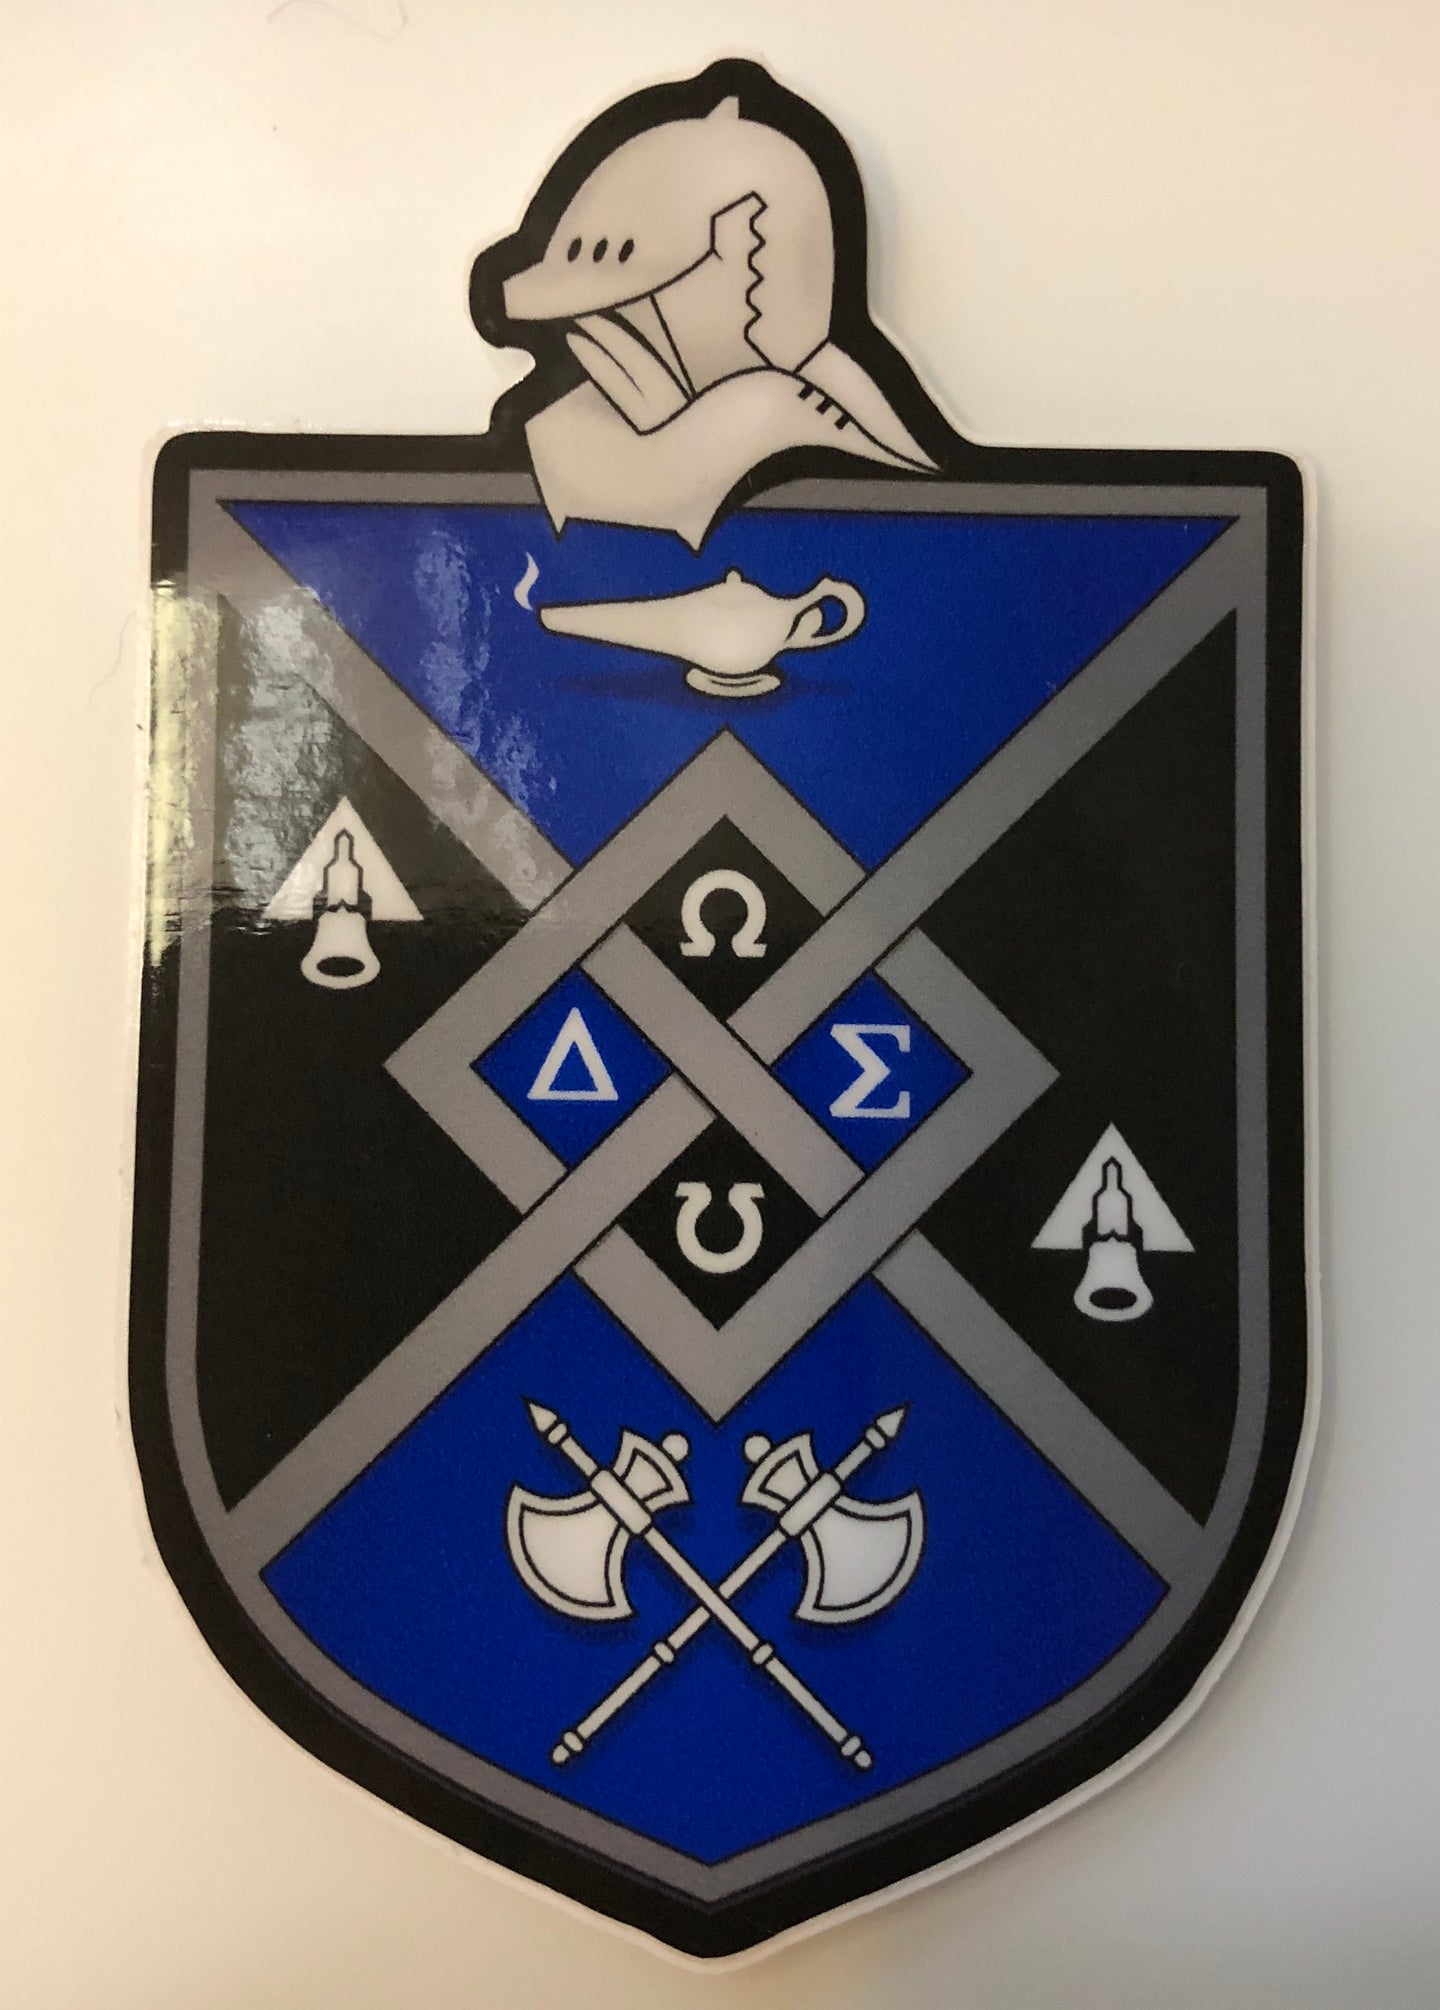 Standard issue crest decal